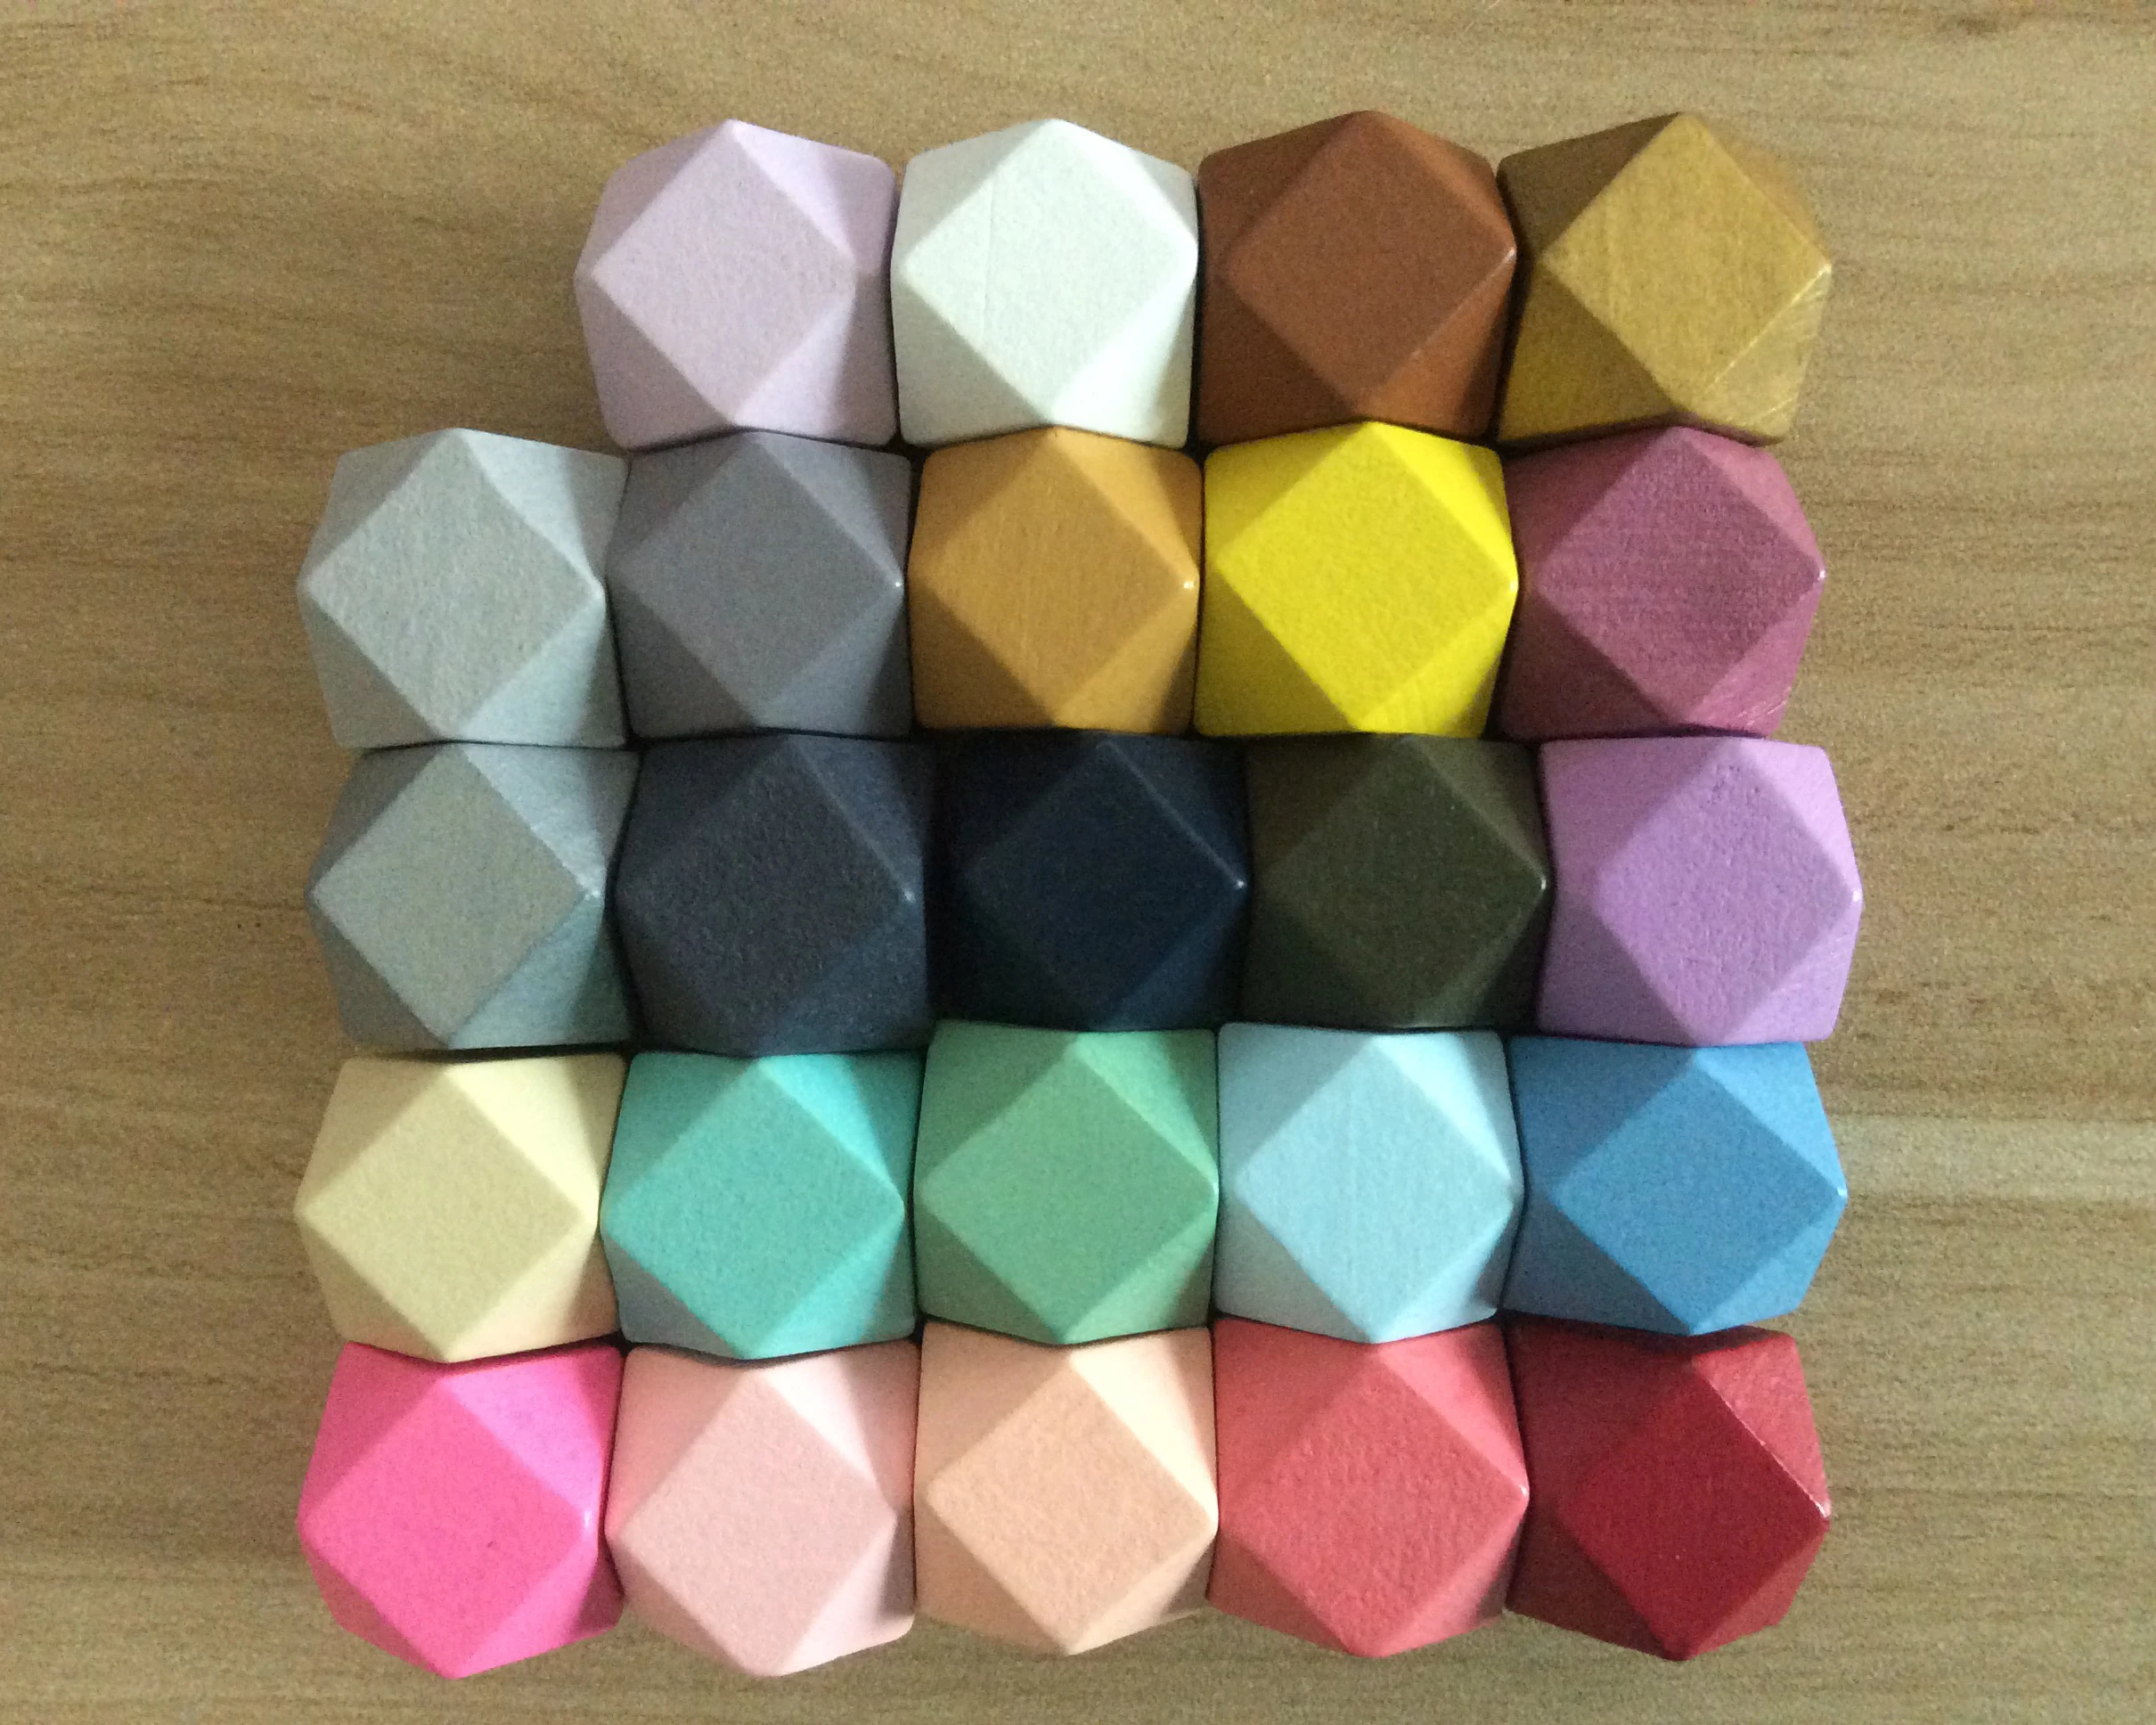 

Large 20MM Painted Hexagon Wooden Beads For Baby DIY Sensory Jewelry Accessories Making, Multiple colors for your choice